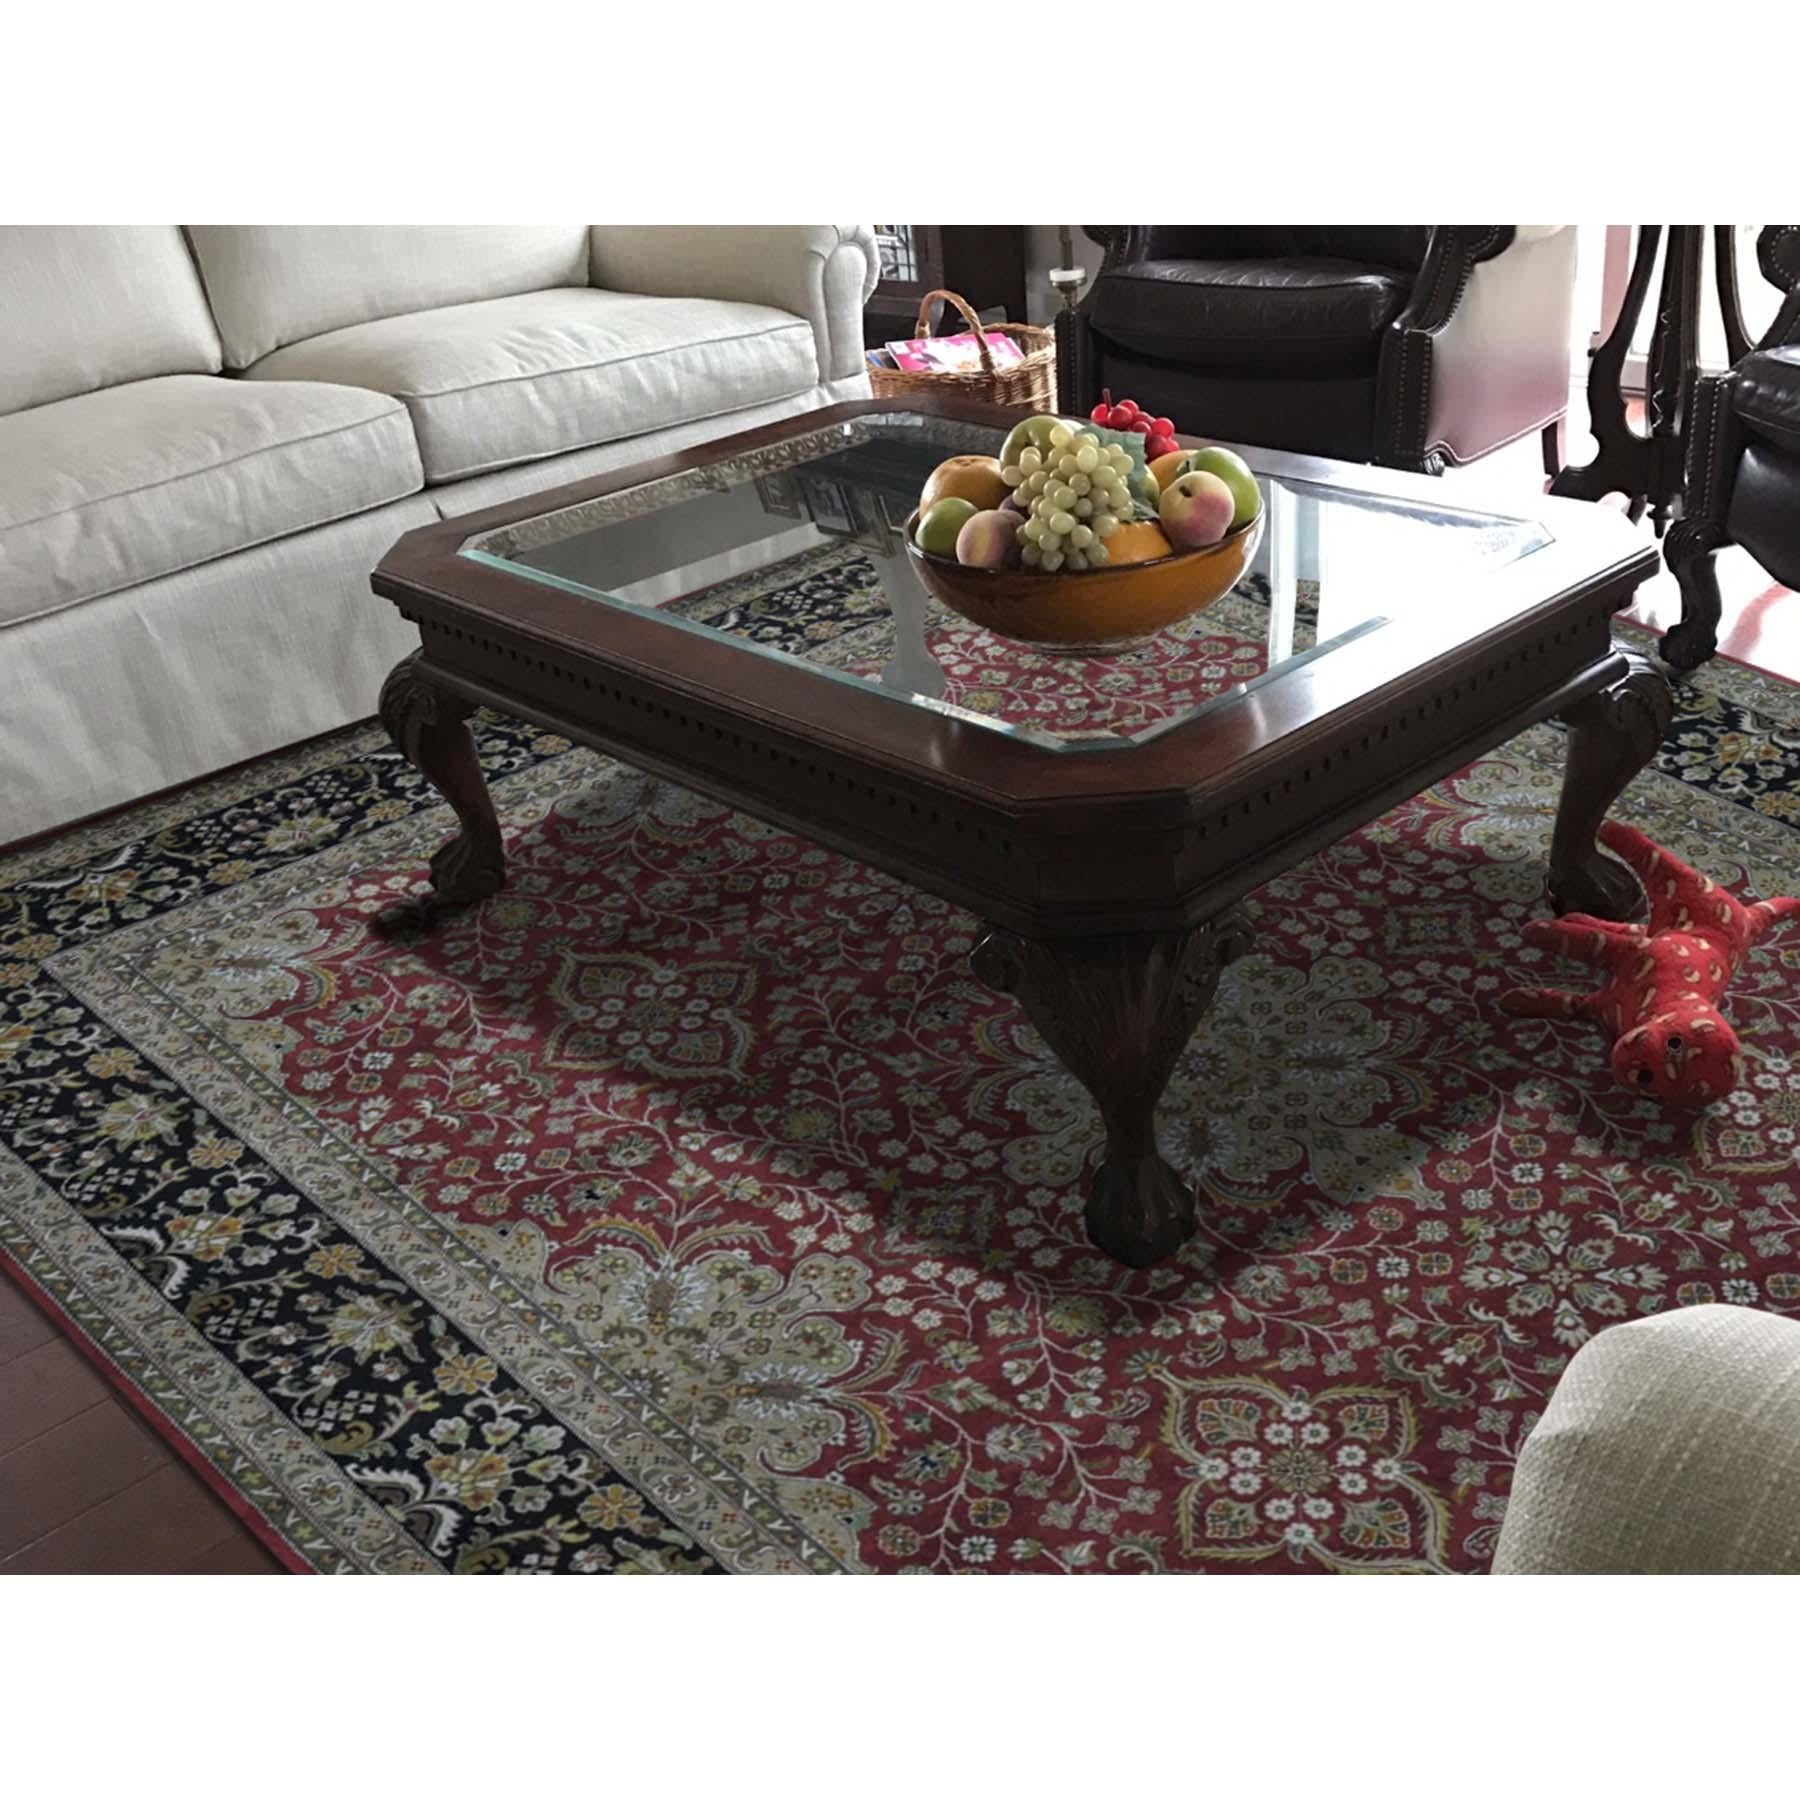 This is a truly genuine one-of-a-kind 300 Kpsi Kashan revival New Zealand wool hand knotted oriental rug. It has been knotted for months and months in the centuries-old Persian weaving craftsmanship techniques by expert artisans. Measures: 8'0